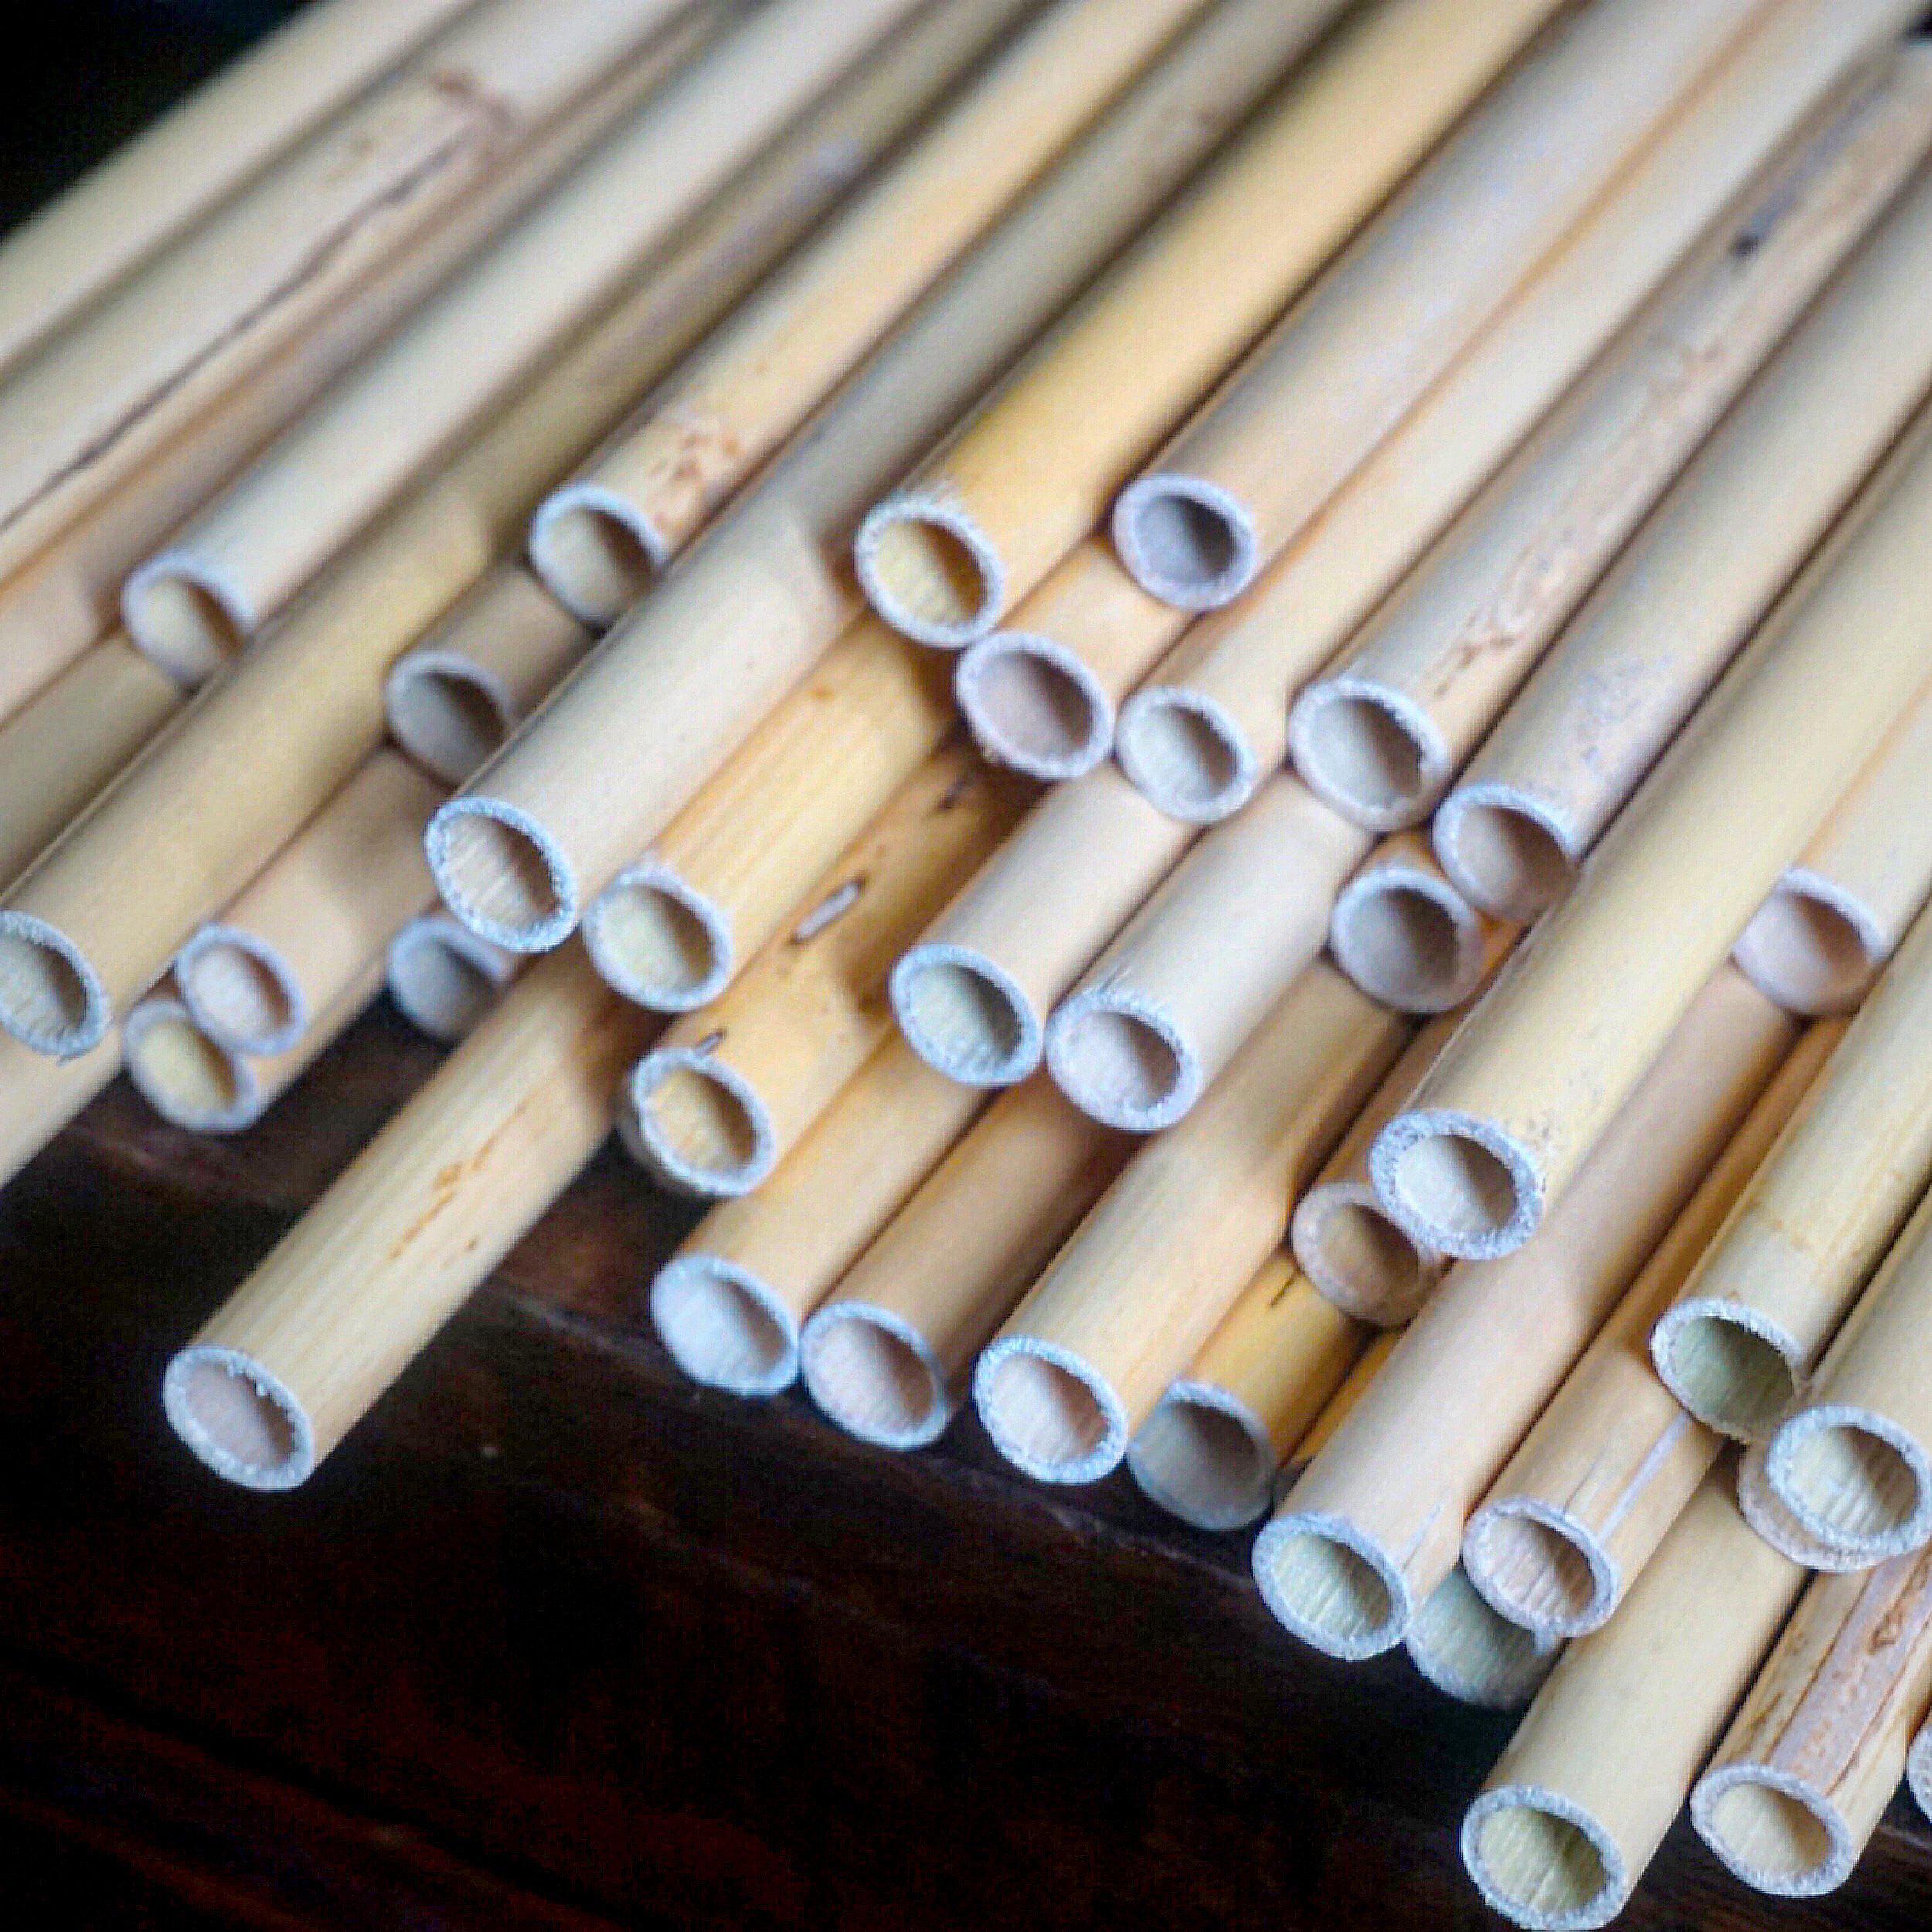 Lavoro oboe tube cane. A.Lakota Reeds caries oboe cane processed from start to finish, tube cane all the way up to handmade oboe reeds